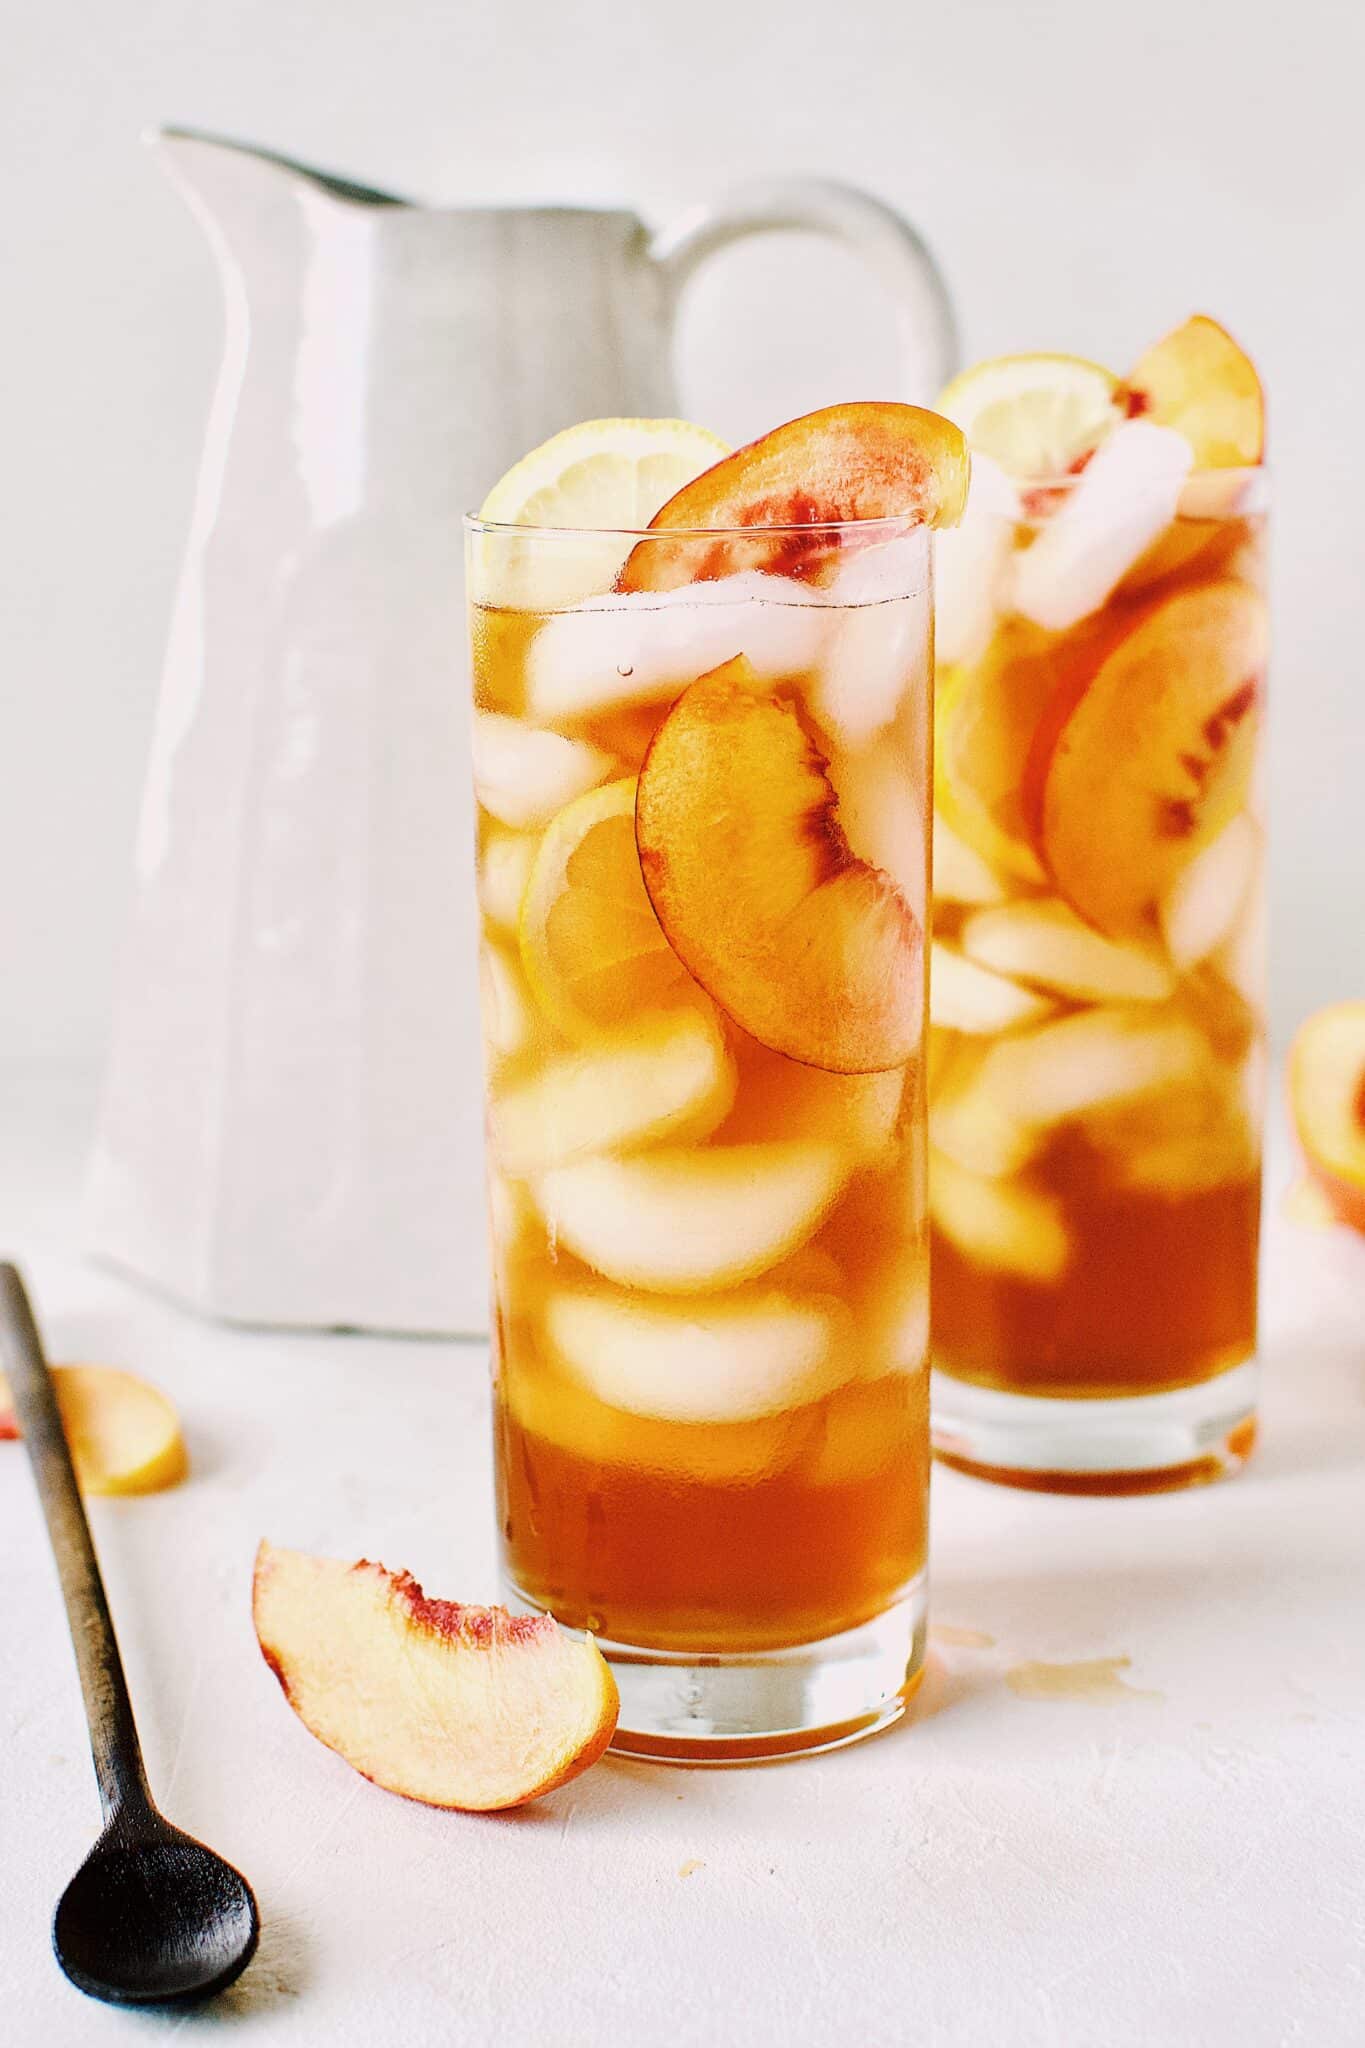 Peach Sweet Tea served up in an ice filled glass with peach and lemon slices inside.